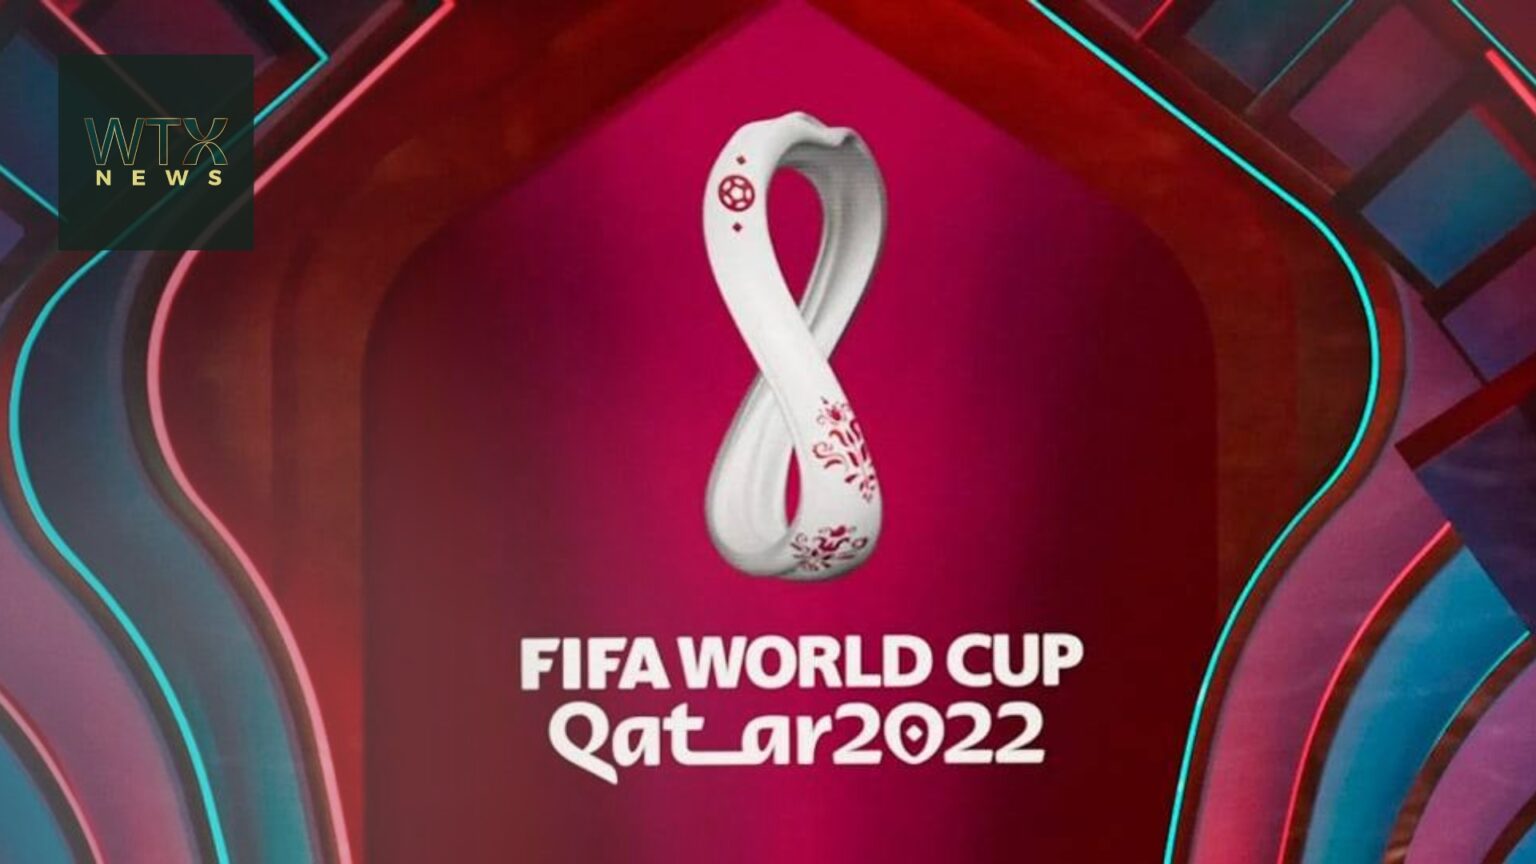 Qatar World Cup 2022 fixtures: 3RD/4TH PLAY-OFF